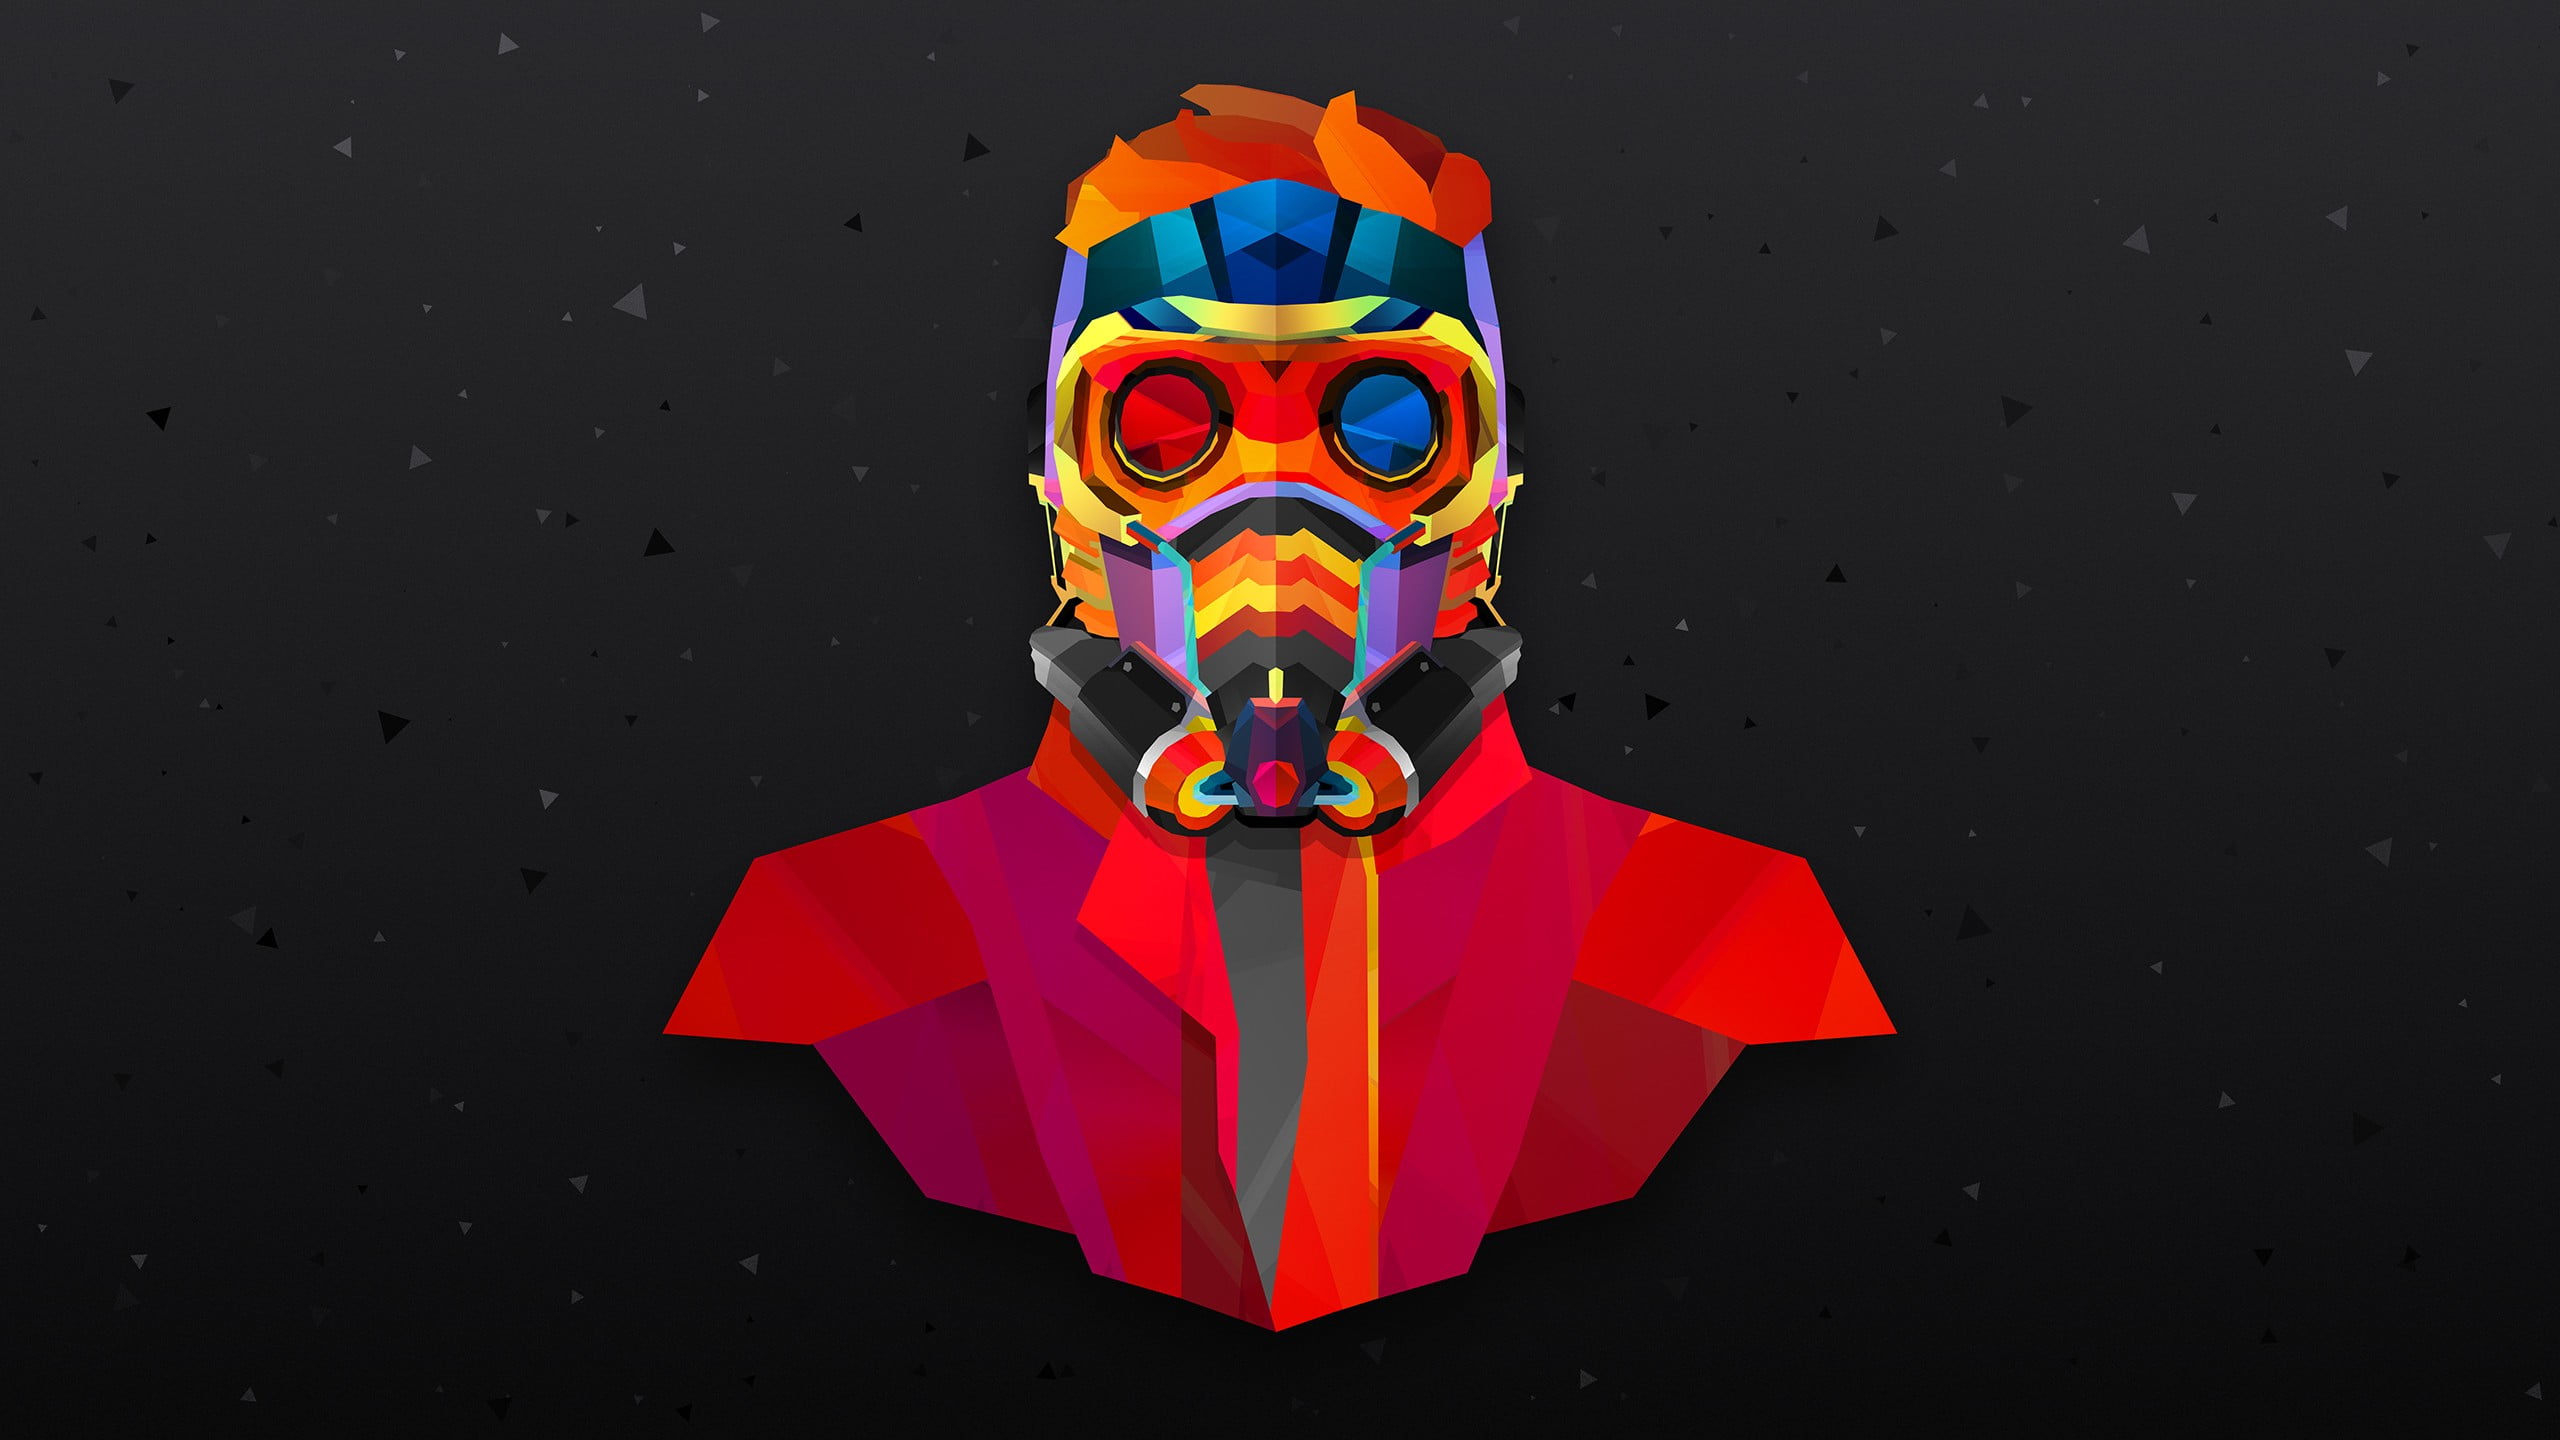 Guardians of the Galaxy Star Lord painting, man with mask illustration